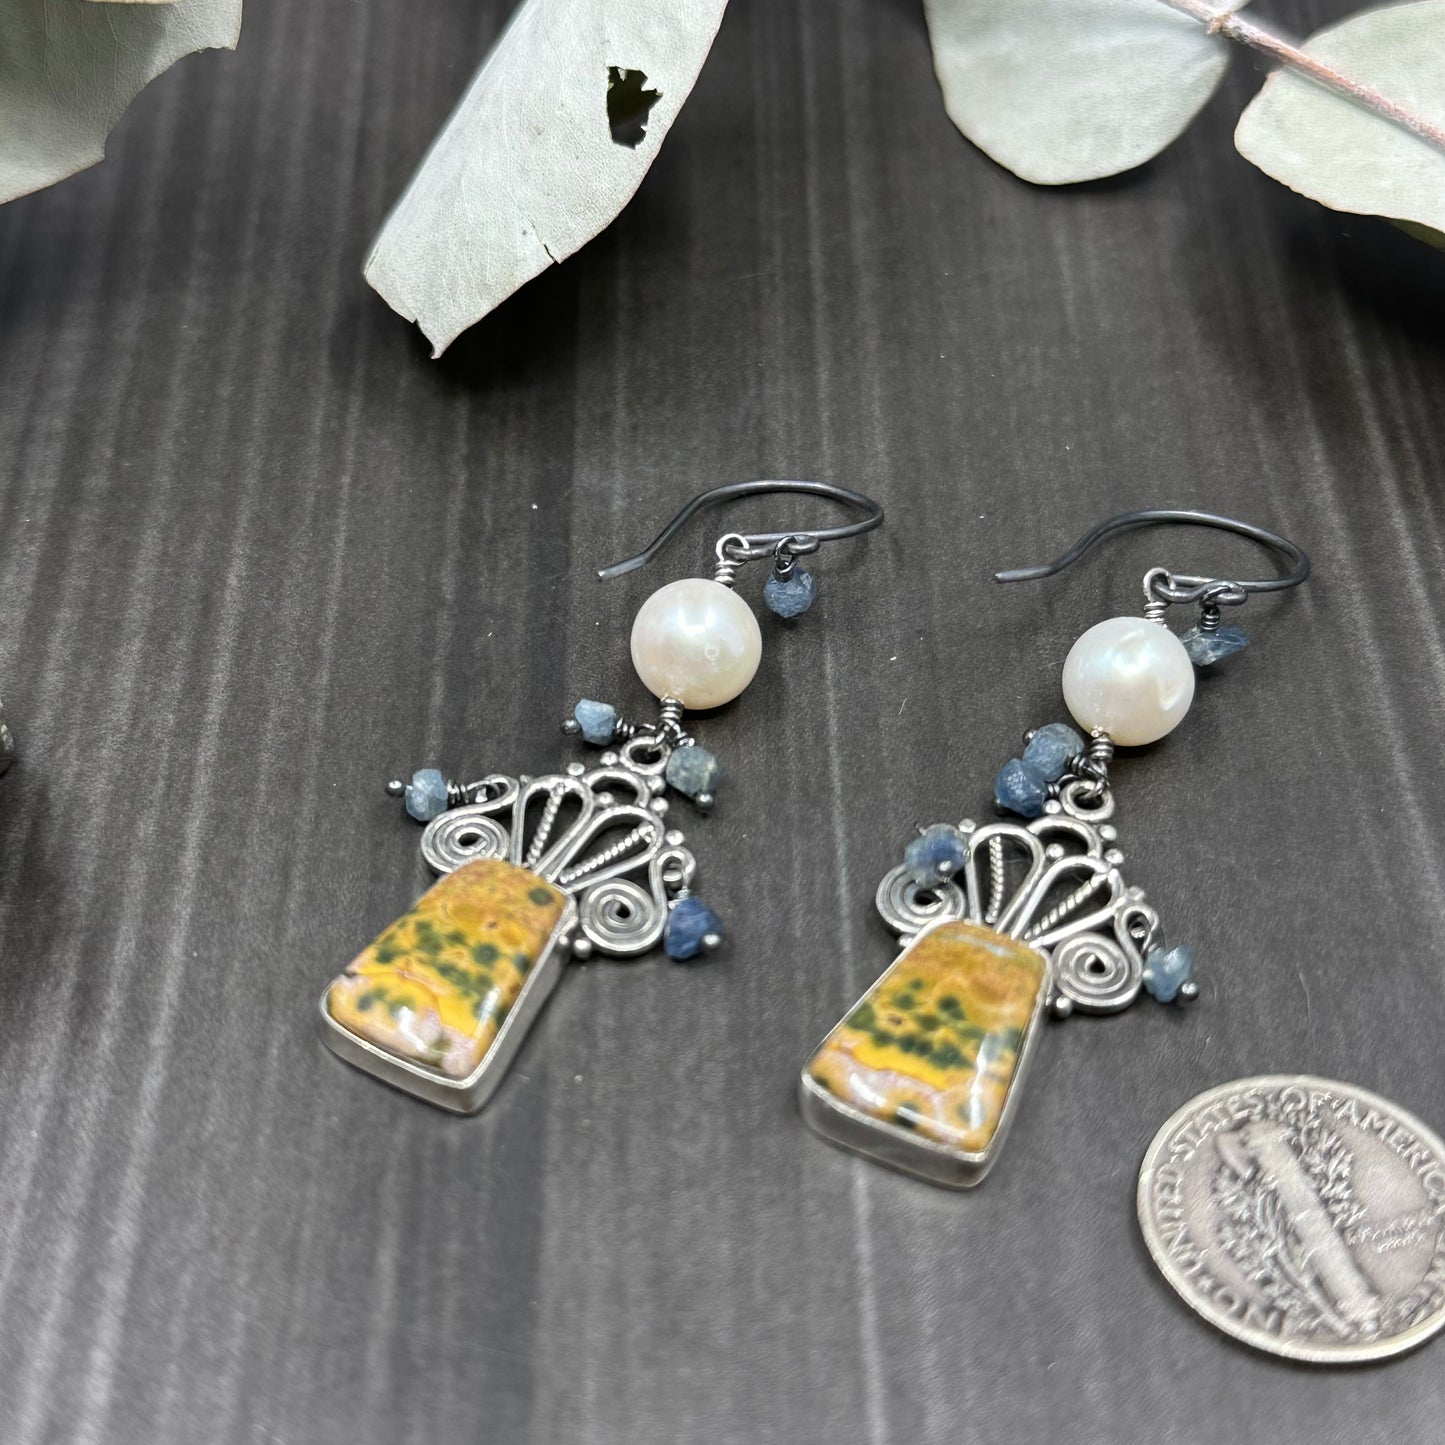 Earrings inspired by Girl with a Pearl Earring